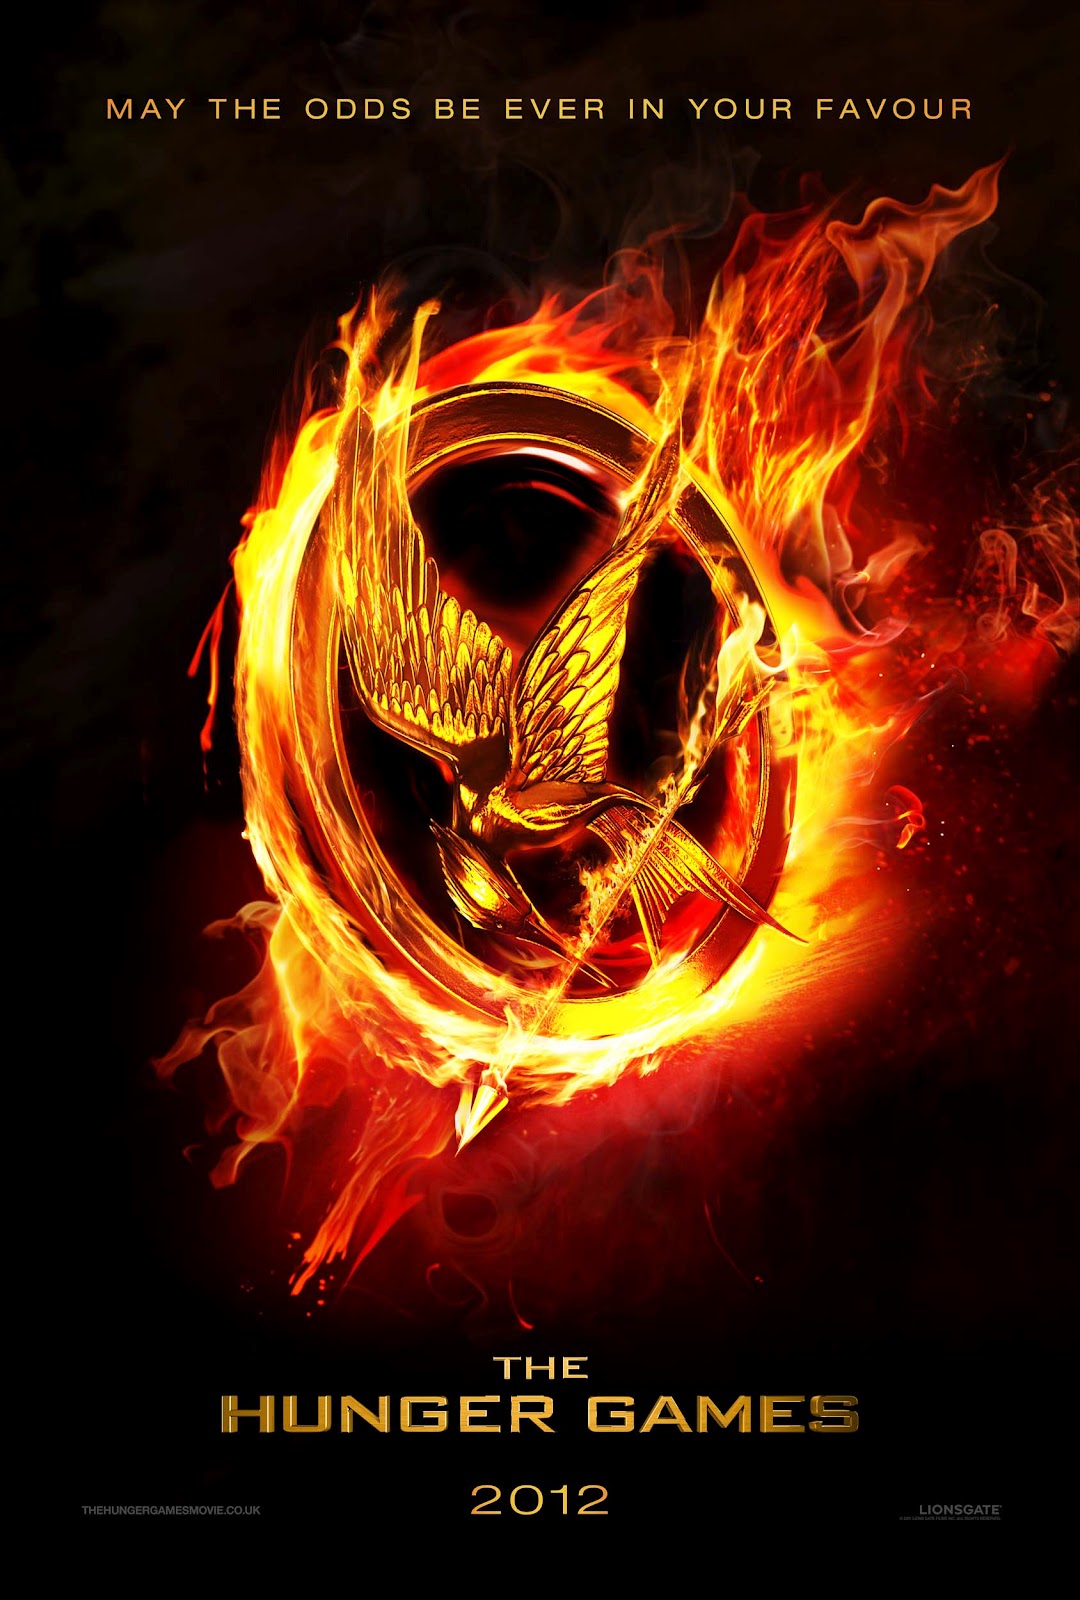 Free Download "The Hunger Games" WallPapers, Posters, and Backgrounds